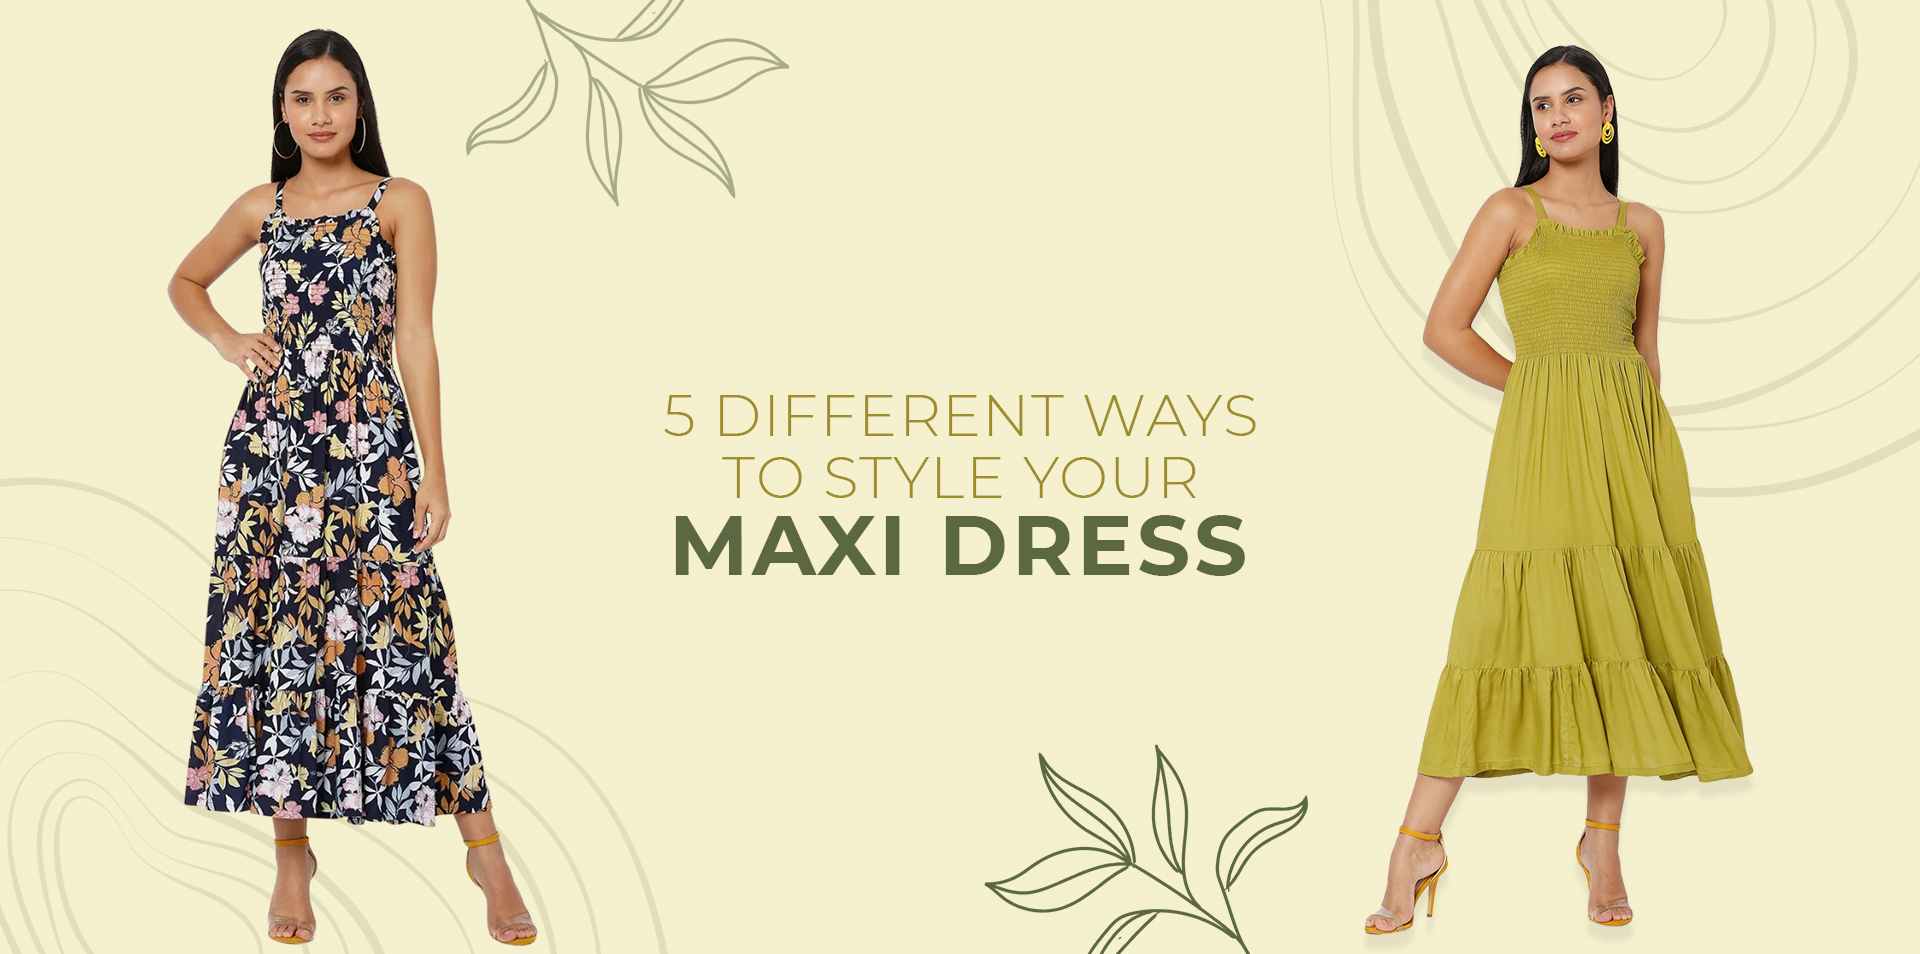 5 Different Ways to Style Your Maxi Dress